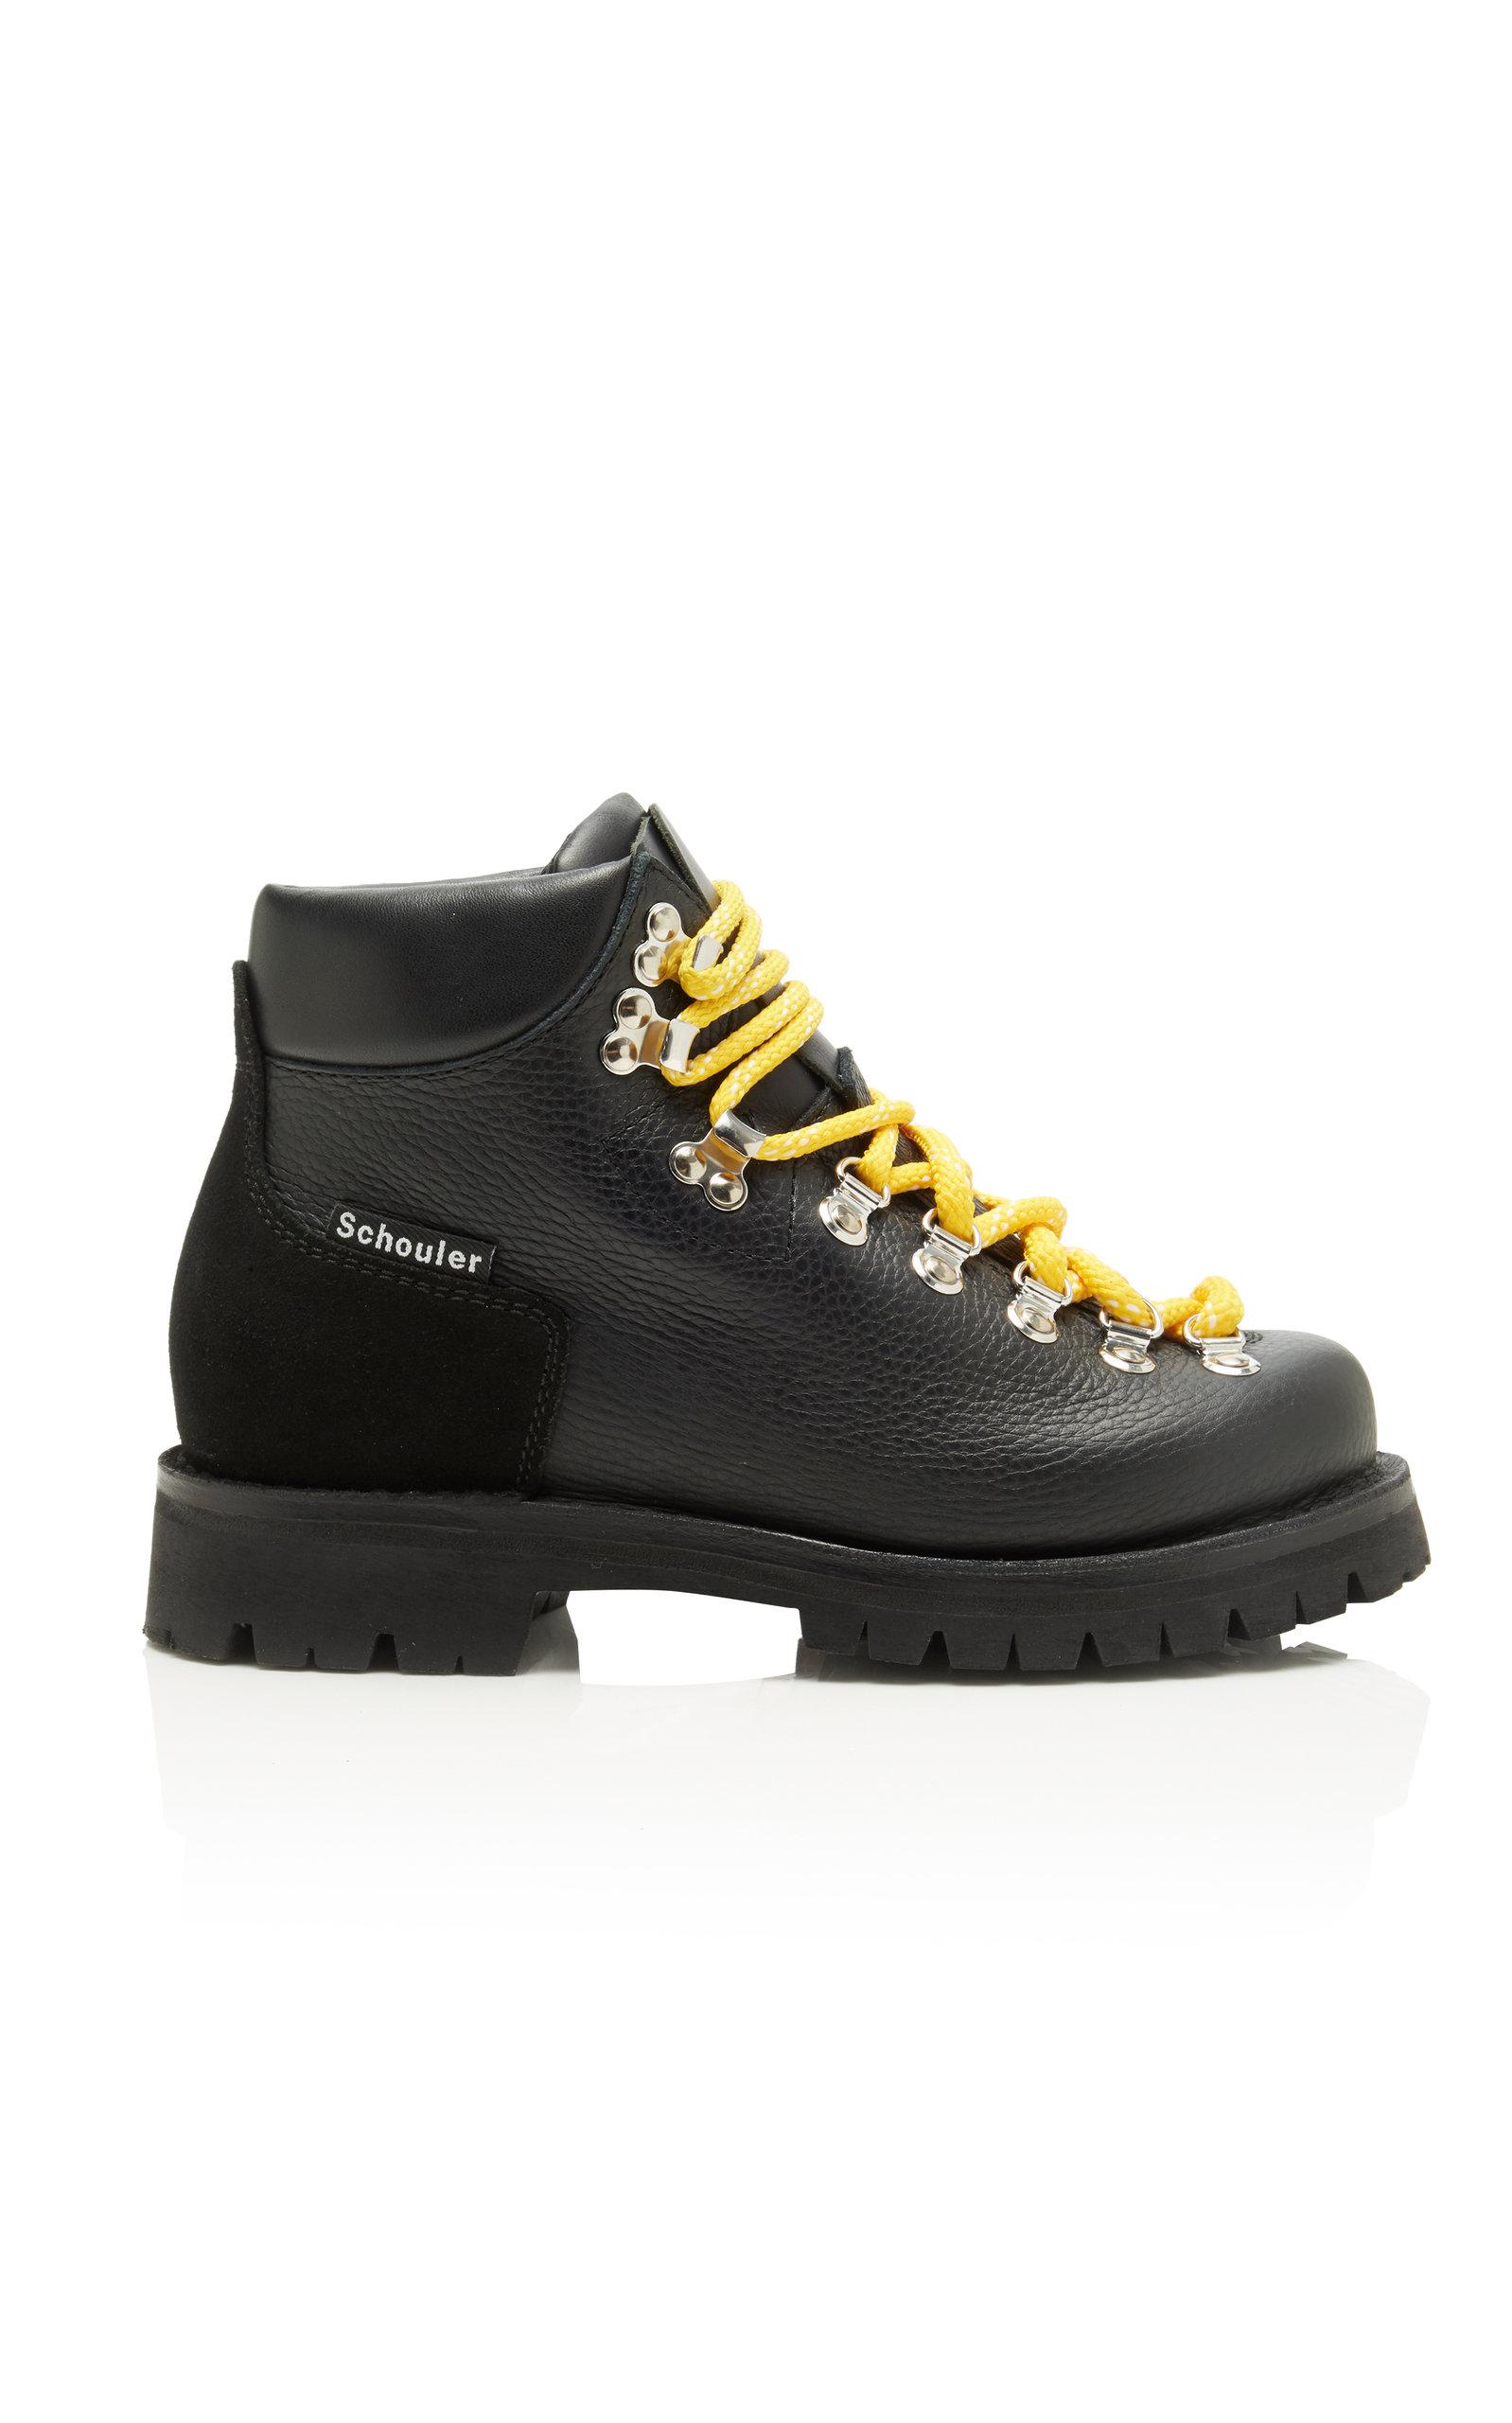 Proenza Schouler Leather Hiking Boot in Black - Lyst